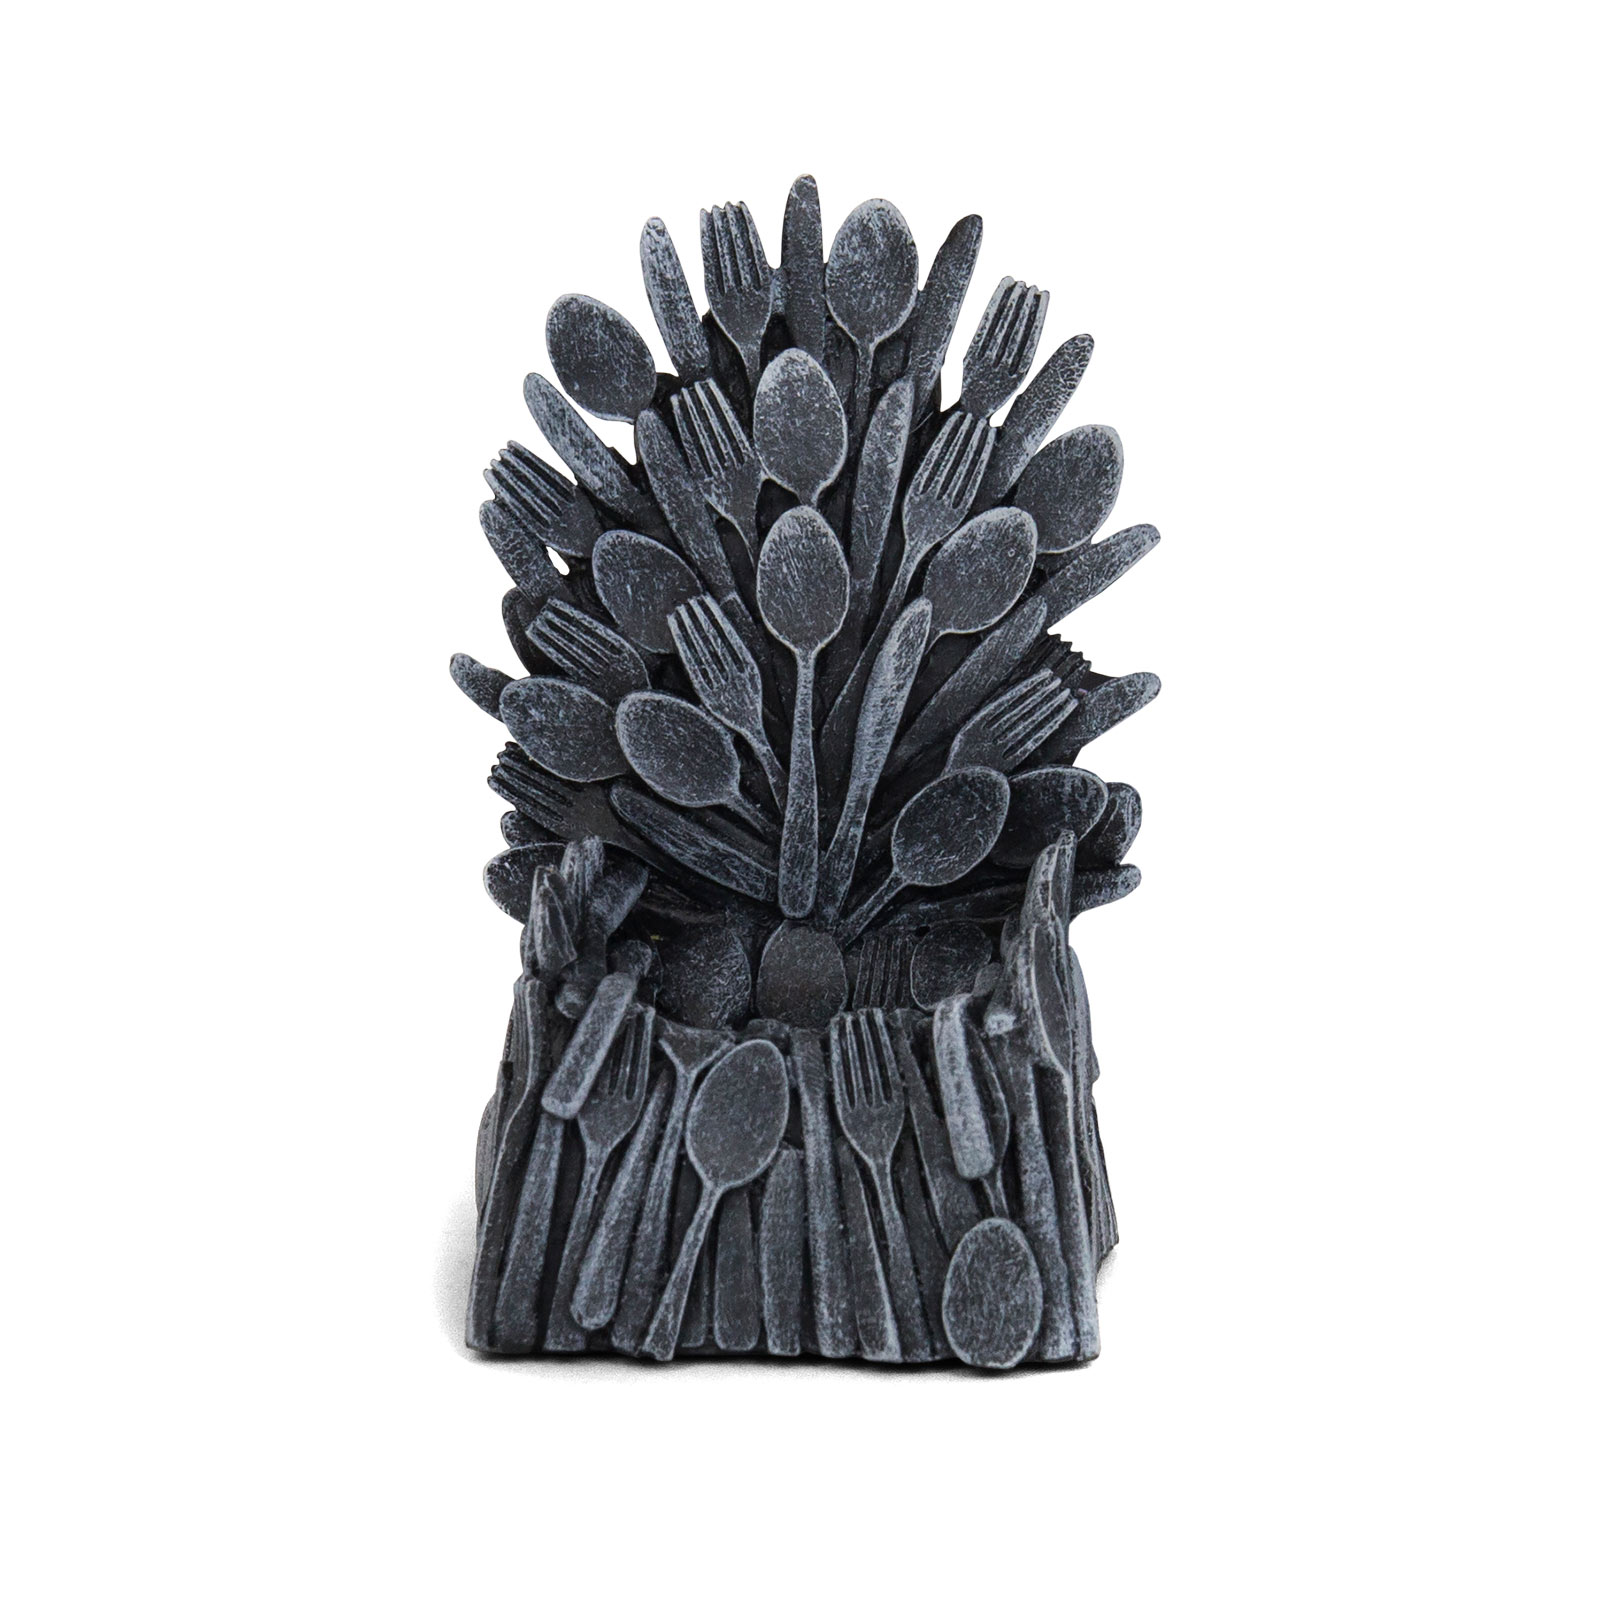 Iron Throne Egg Cup for Game of Thrones Fans